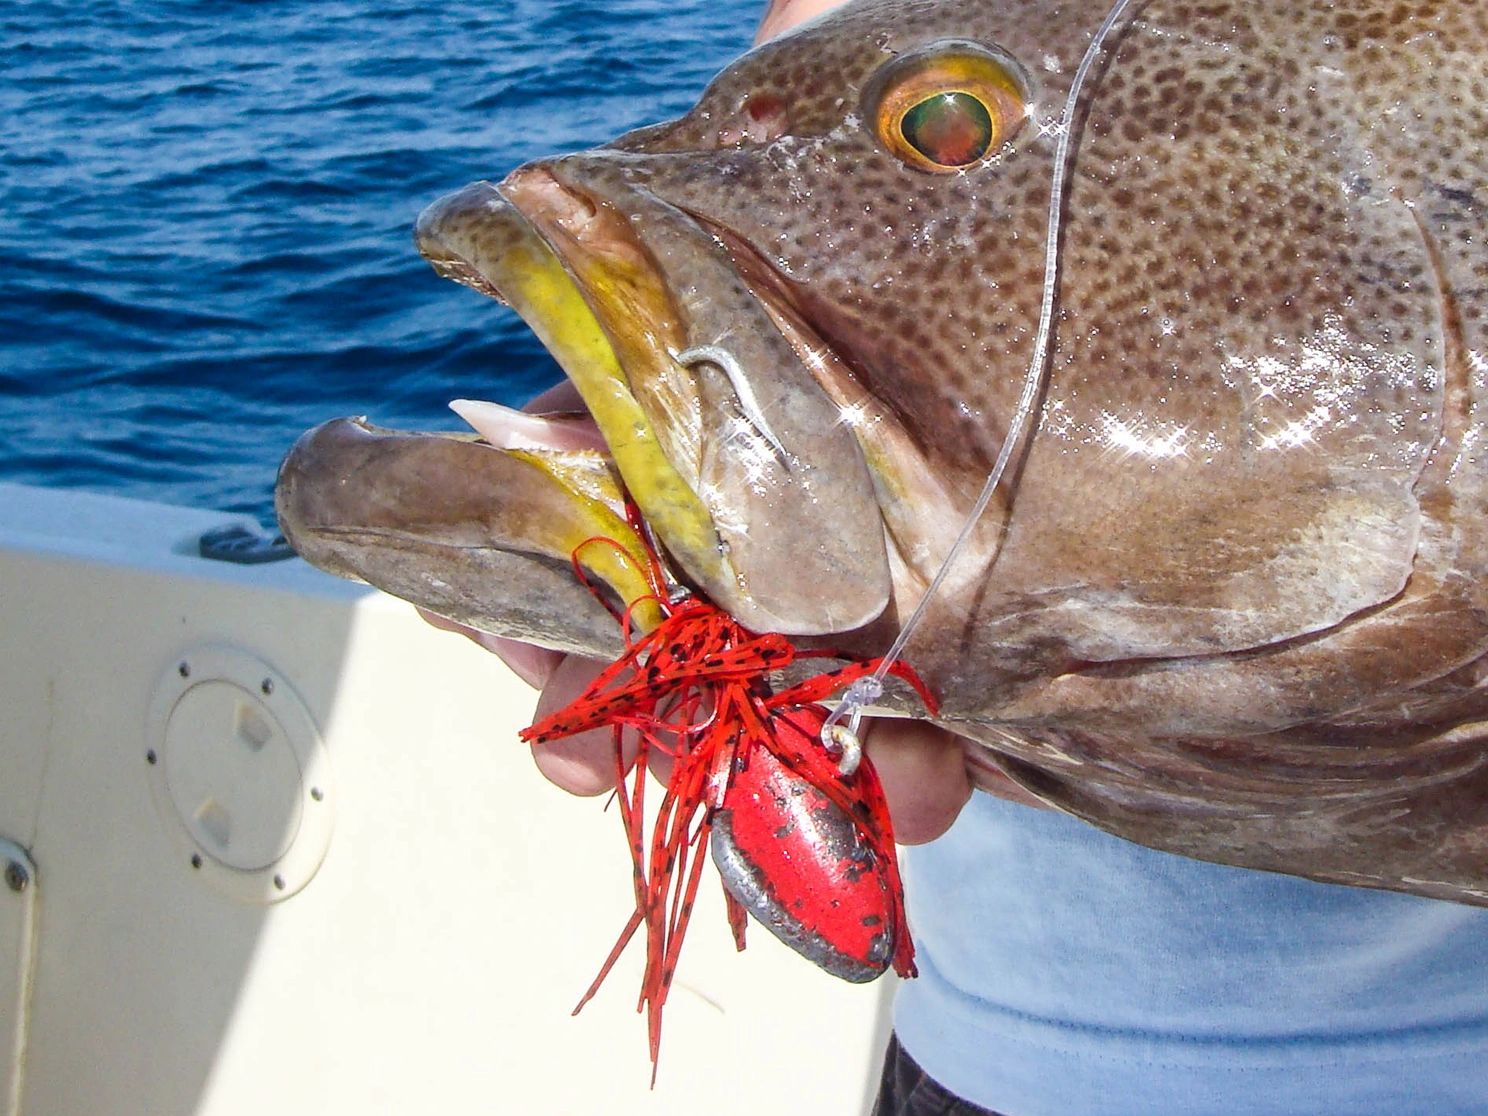 Coastal anglers order Crab Decoy Jigs for striped bass, drum, snook, grouper, west coast bottom fish